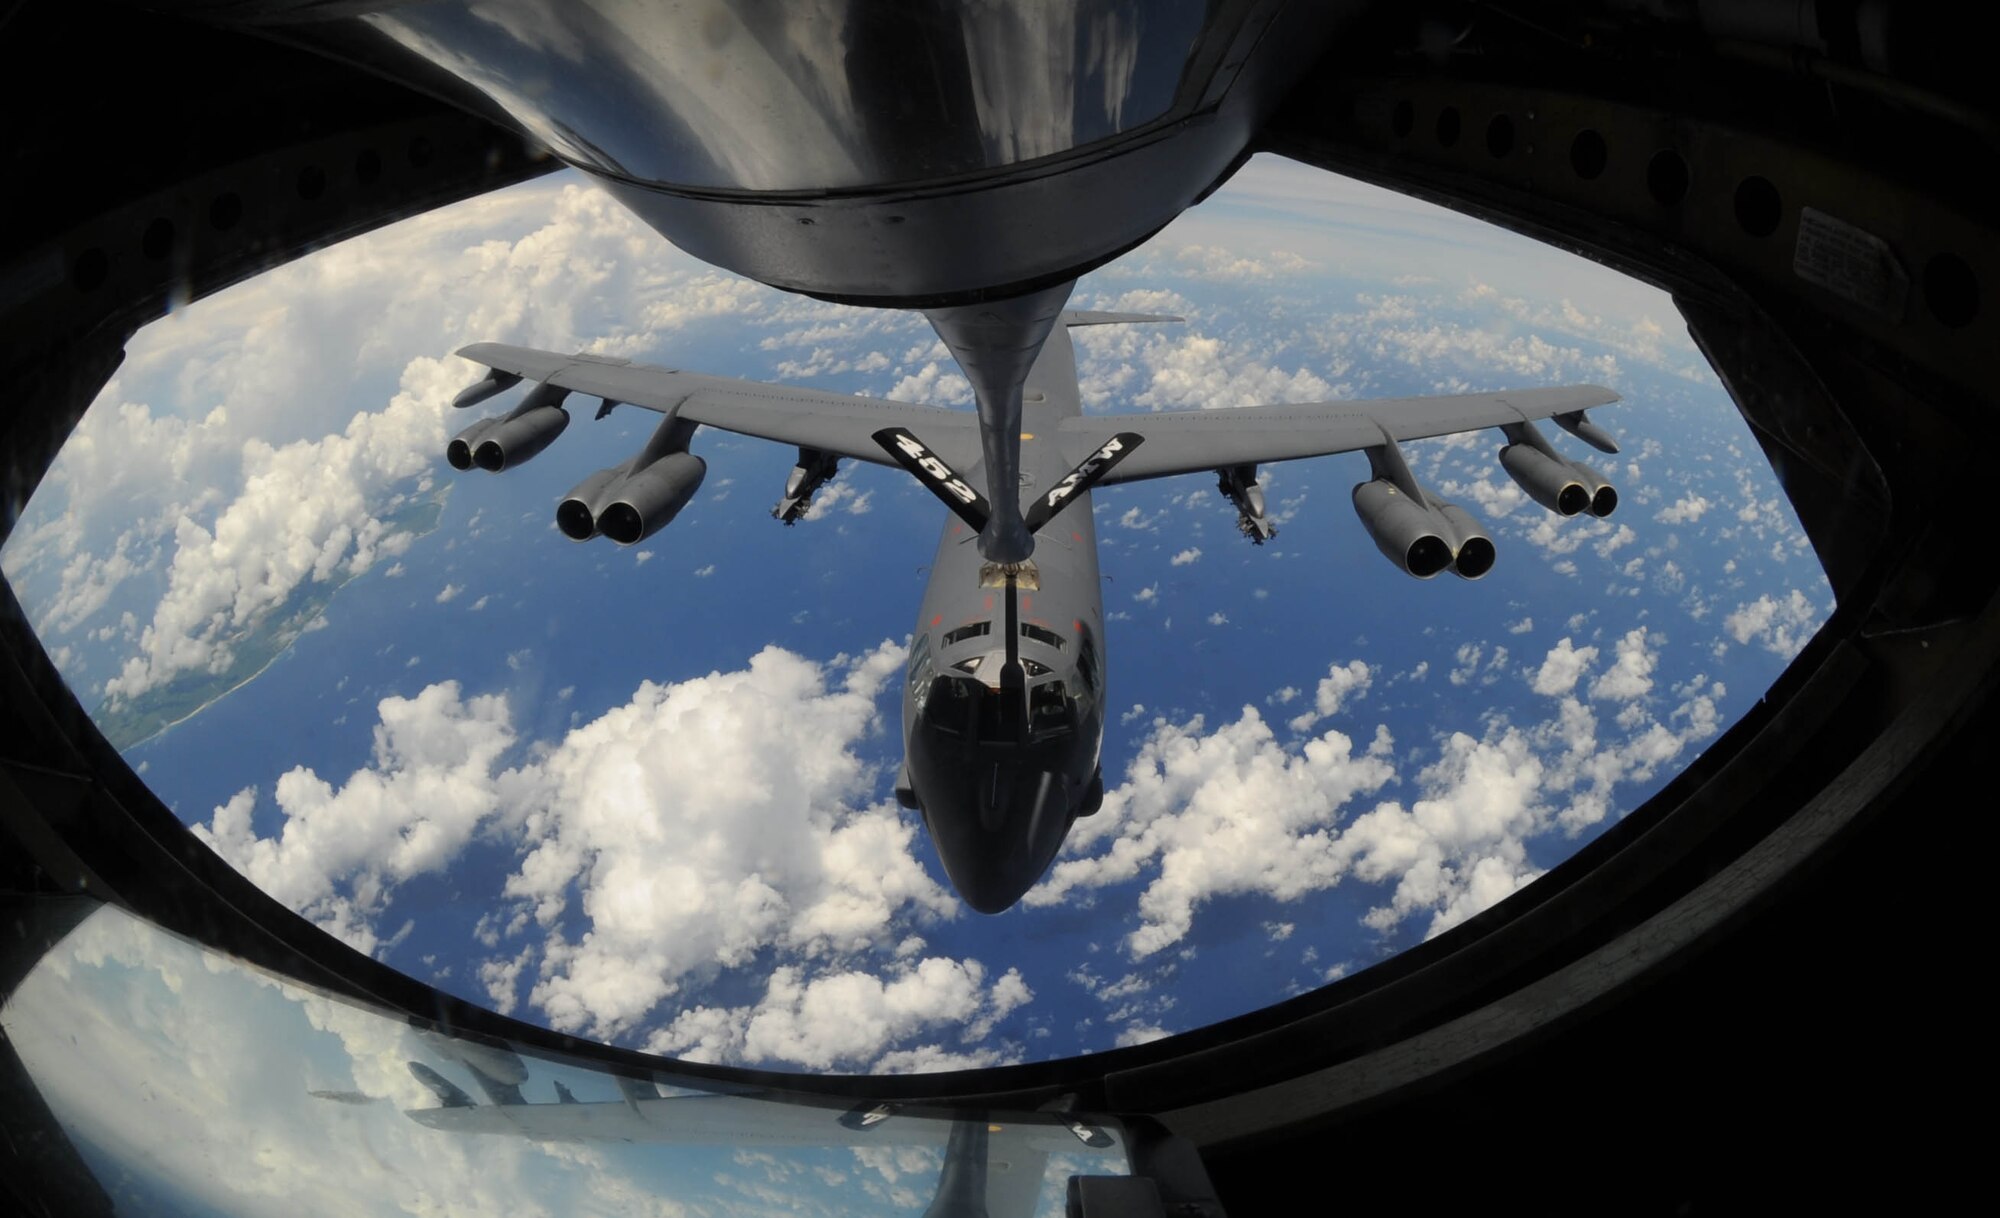 A B-52 Stratofortress bomber approaches for a refueling over the Pacific
Ocean Aug. 13. KC-135 Stratotankers, F-22 Raptors and B-52 Stratofortress
bombers took part in the 2009 Inaugural Turkey Shoot Competition, which allows air
expeditionary units to plan and execute tactical missions with airframes
that don't regularly train together.  The B-52's are deployed from Barksdale
Air Force Base, La., to Andersen AFB, Guam, to support U.S. Pacific
Command's Continuous Bomber Presence in the Asia-Pacific region.  (U.S. Air
Force photo/Senior Airman Christopher Bush)
